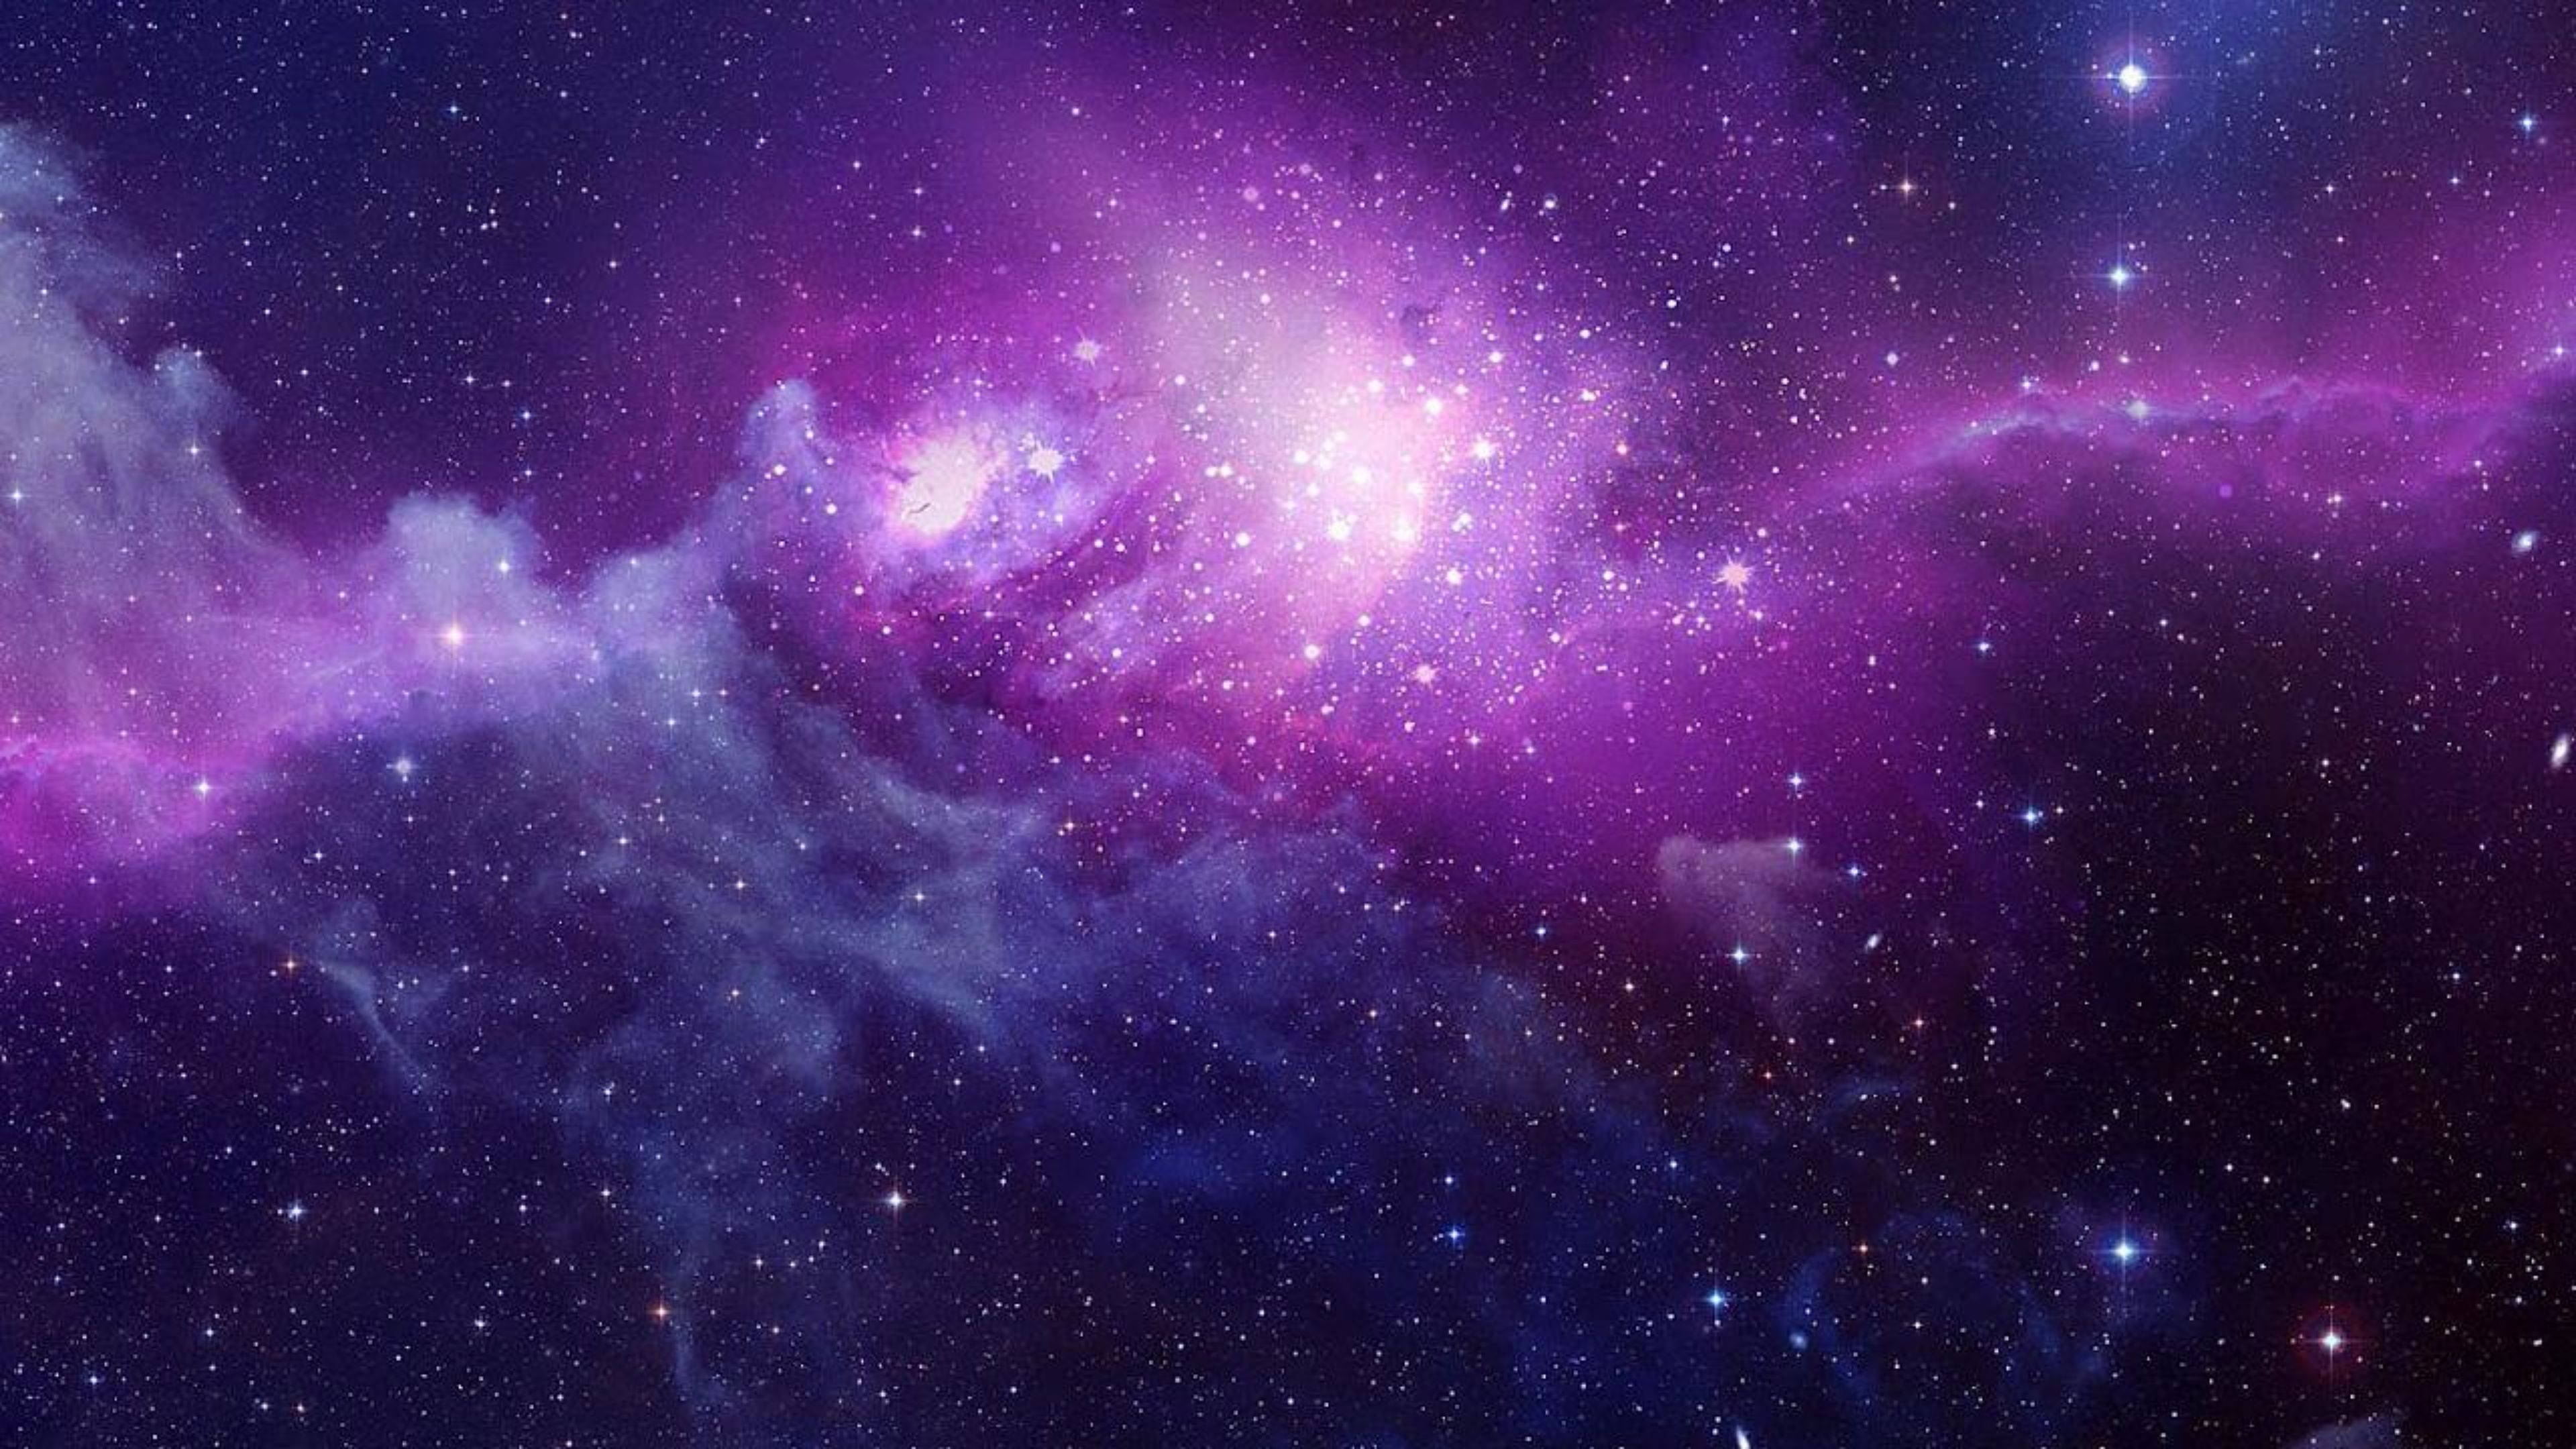 purple wallpapers, photos and desktop backgrounds up to 8K [7680x4320